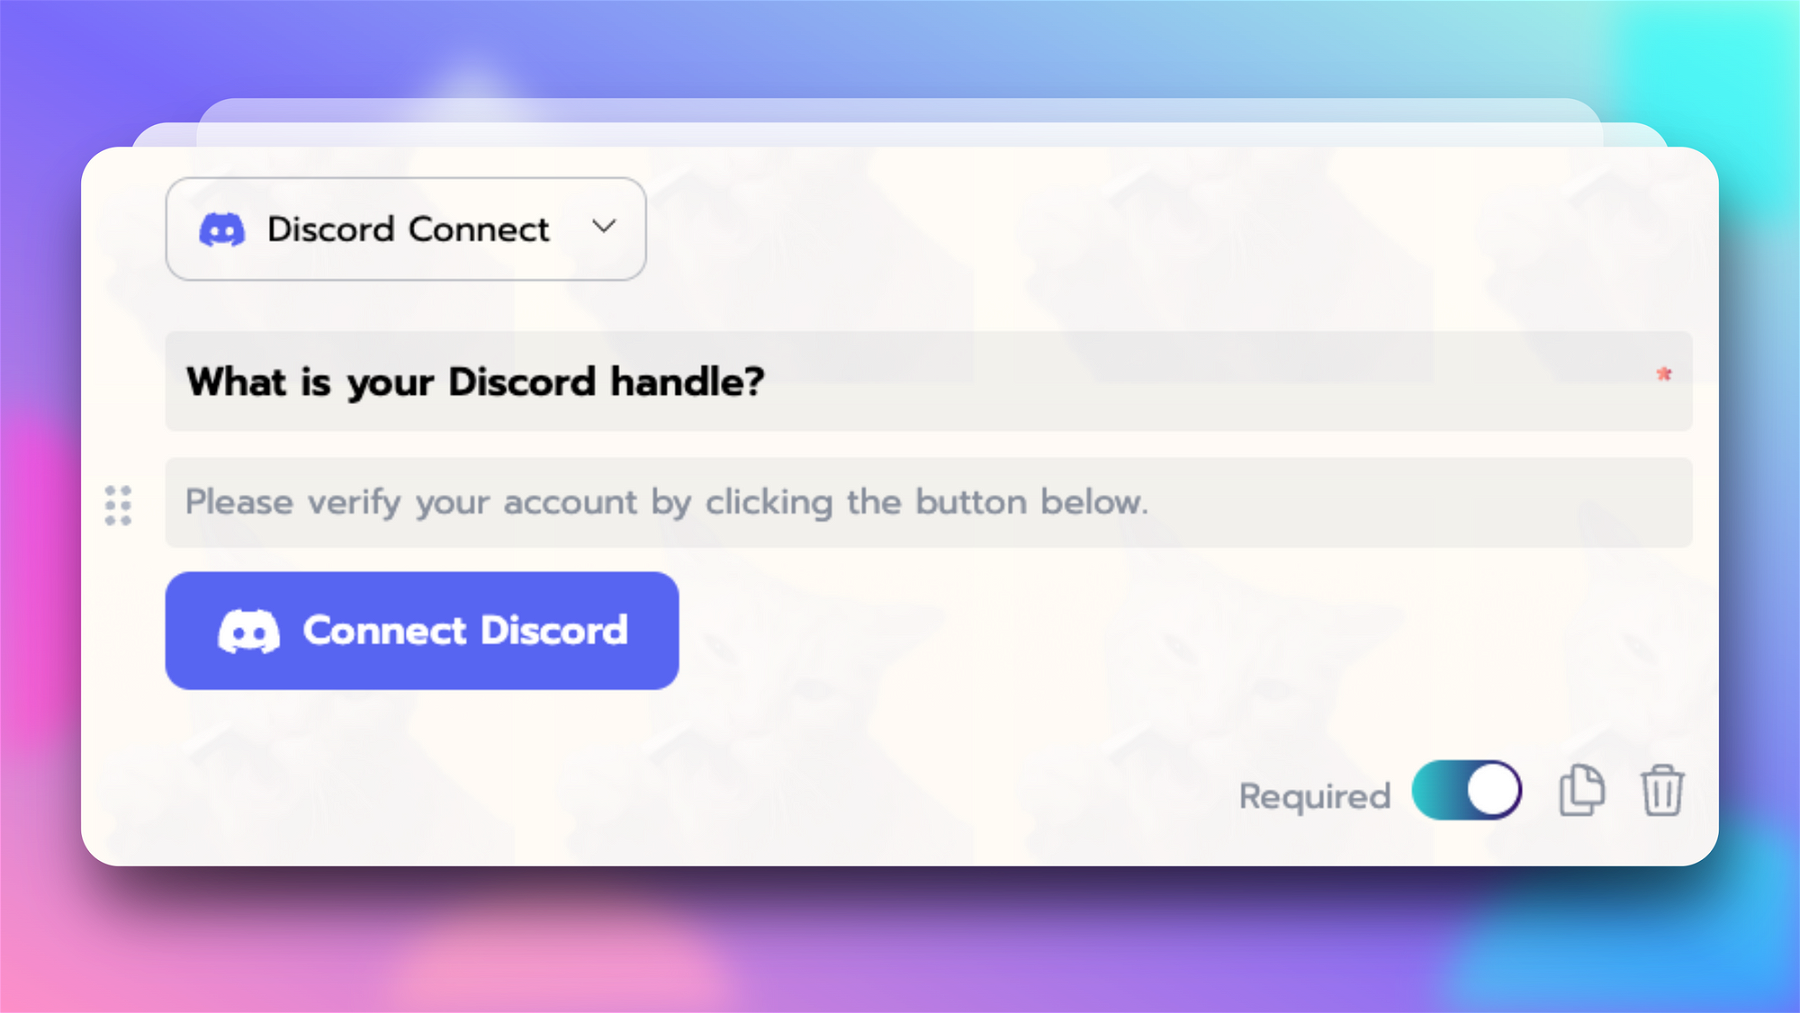 By default, the Discord Connect option will ask the responder, “What is your Discord handle?”. This can be changed to your liking. You can also change the description as well.